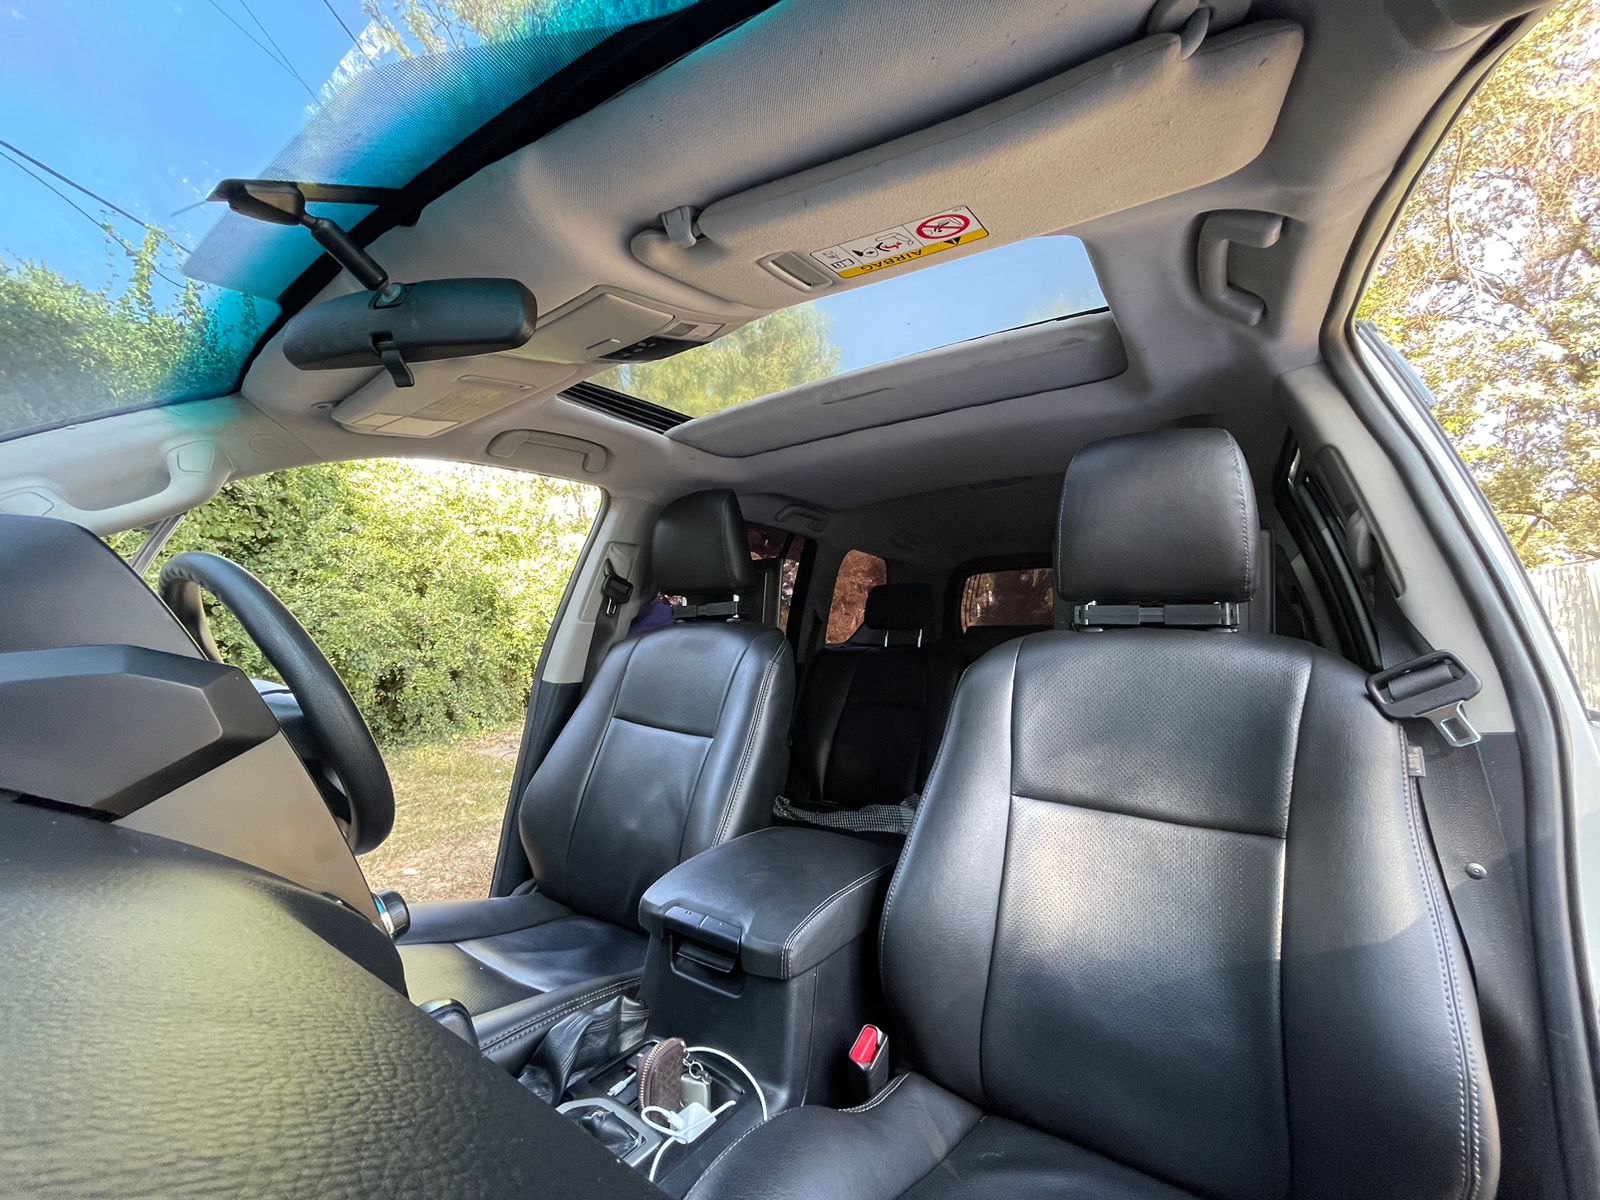 Toyota Prado J150 Leather SUNROOF You Pay 30% Deposit Trade in OK QUICK SALE